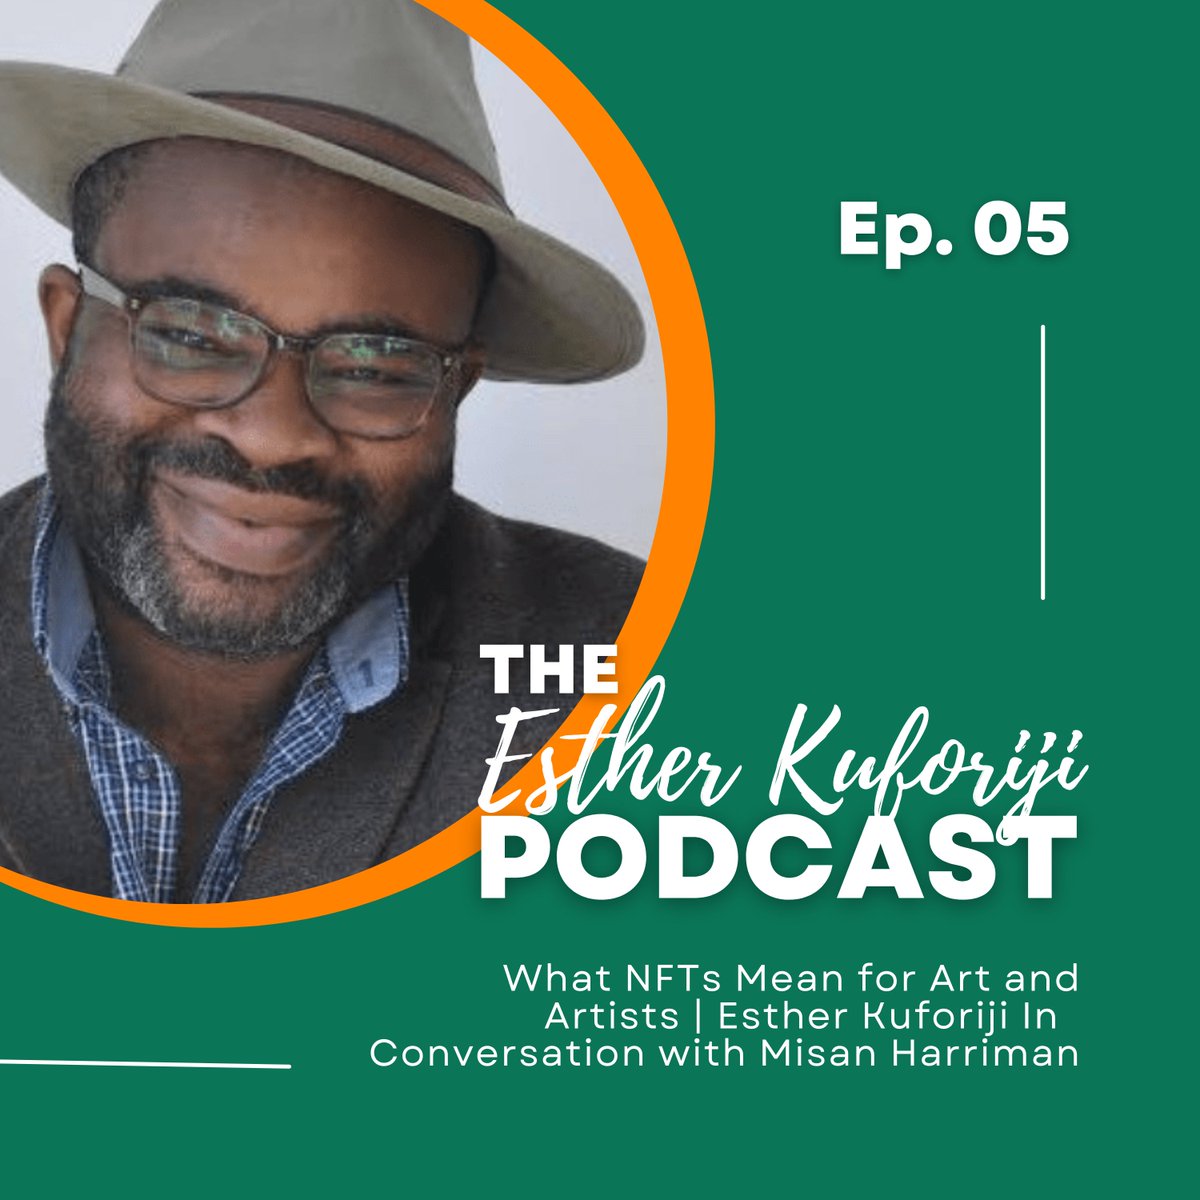 NOW LIVE: EP 5 - What NFTs Mean for Art and Artists | Esther Kuforiji In Conversation with Misan Harriman. In my fifth episode of 'The Esther Kuforiji Podcast', I talk with @misanharriman, the Chair of the Southbank Centre in London. Listen here: buzzsprout.com/1266209